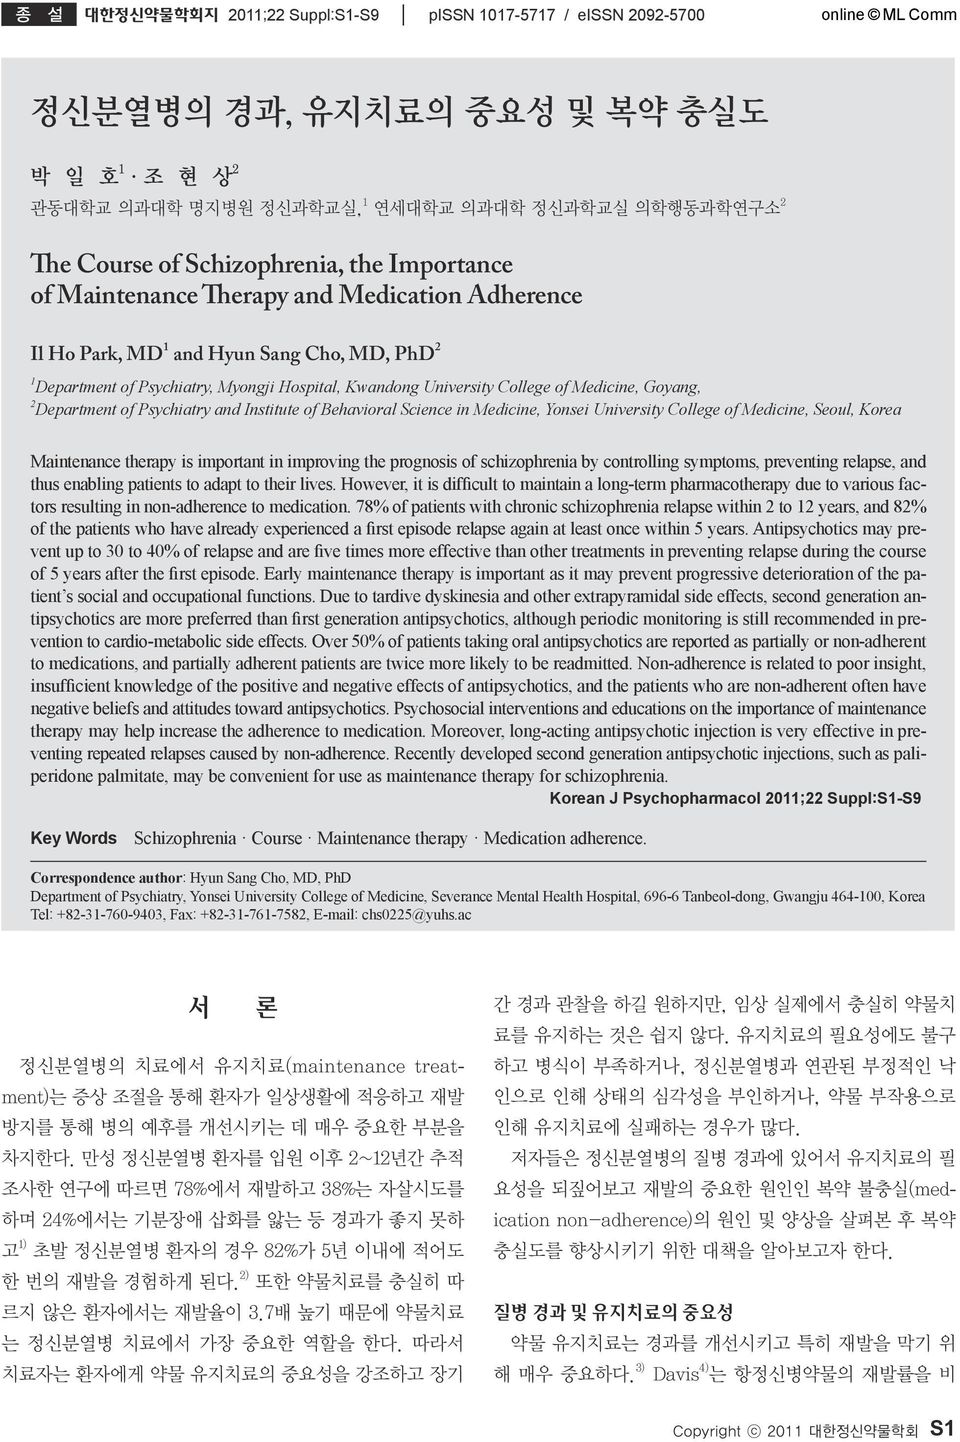 of Medicine, Goyang, 2 Department of Psychiatry and Institute of Behavioral Science in Medicine, Yonsei University College of Medicine, Seoul, Korea Maintenance therapy is important in improving the